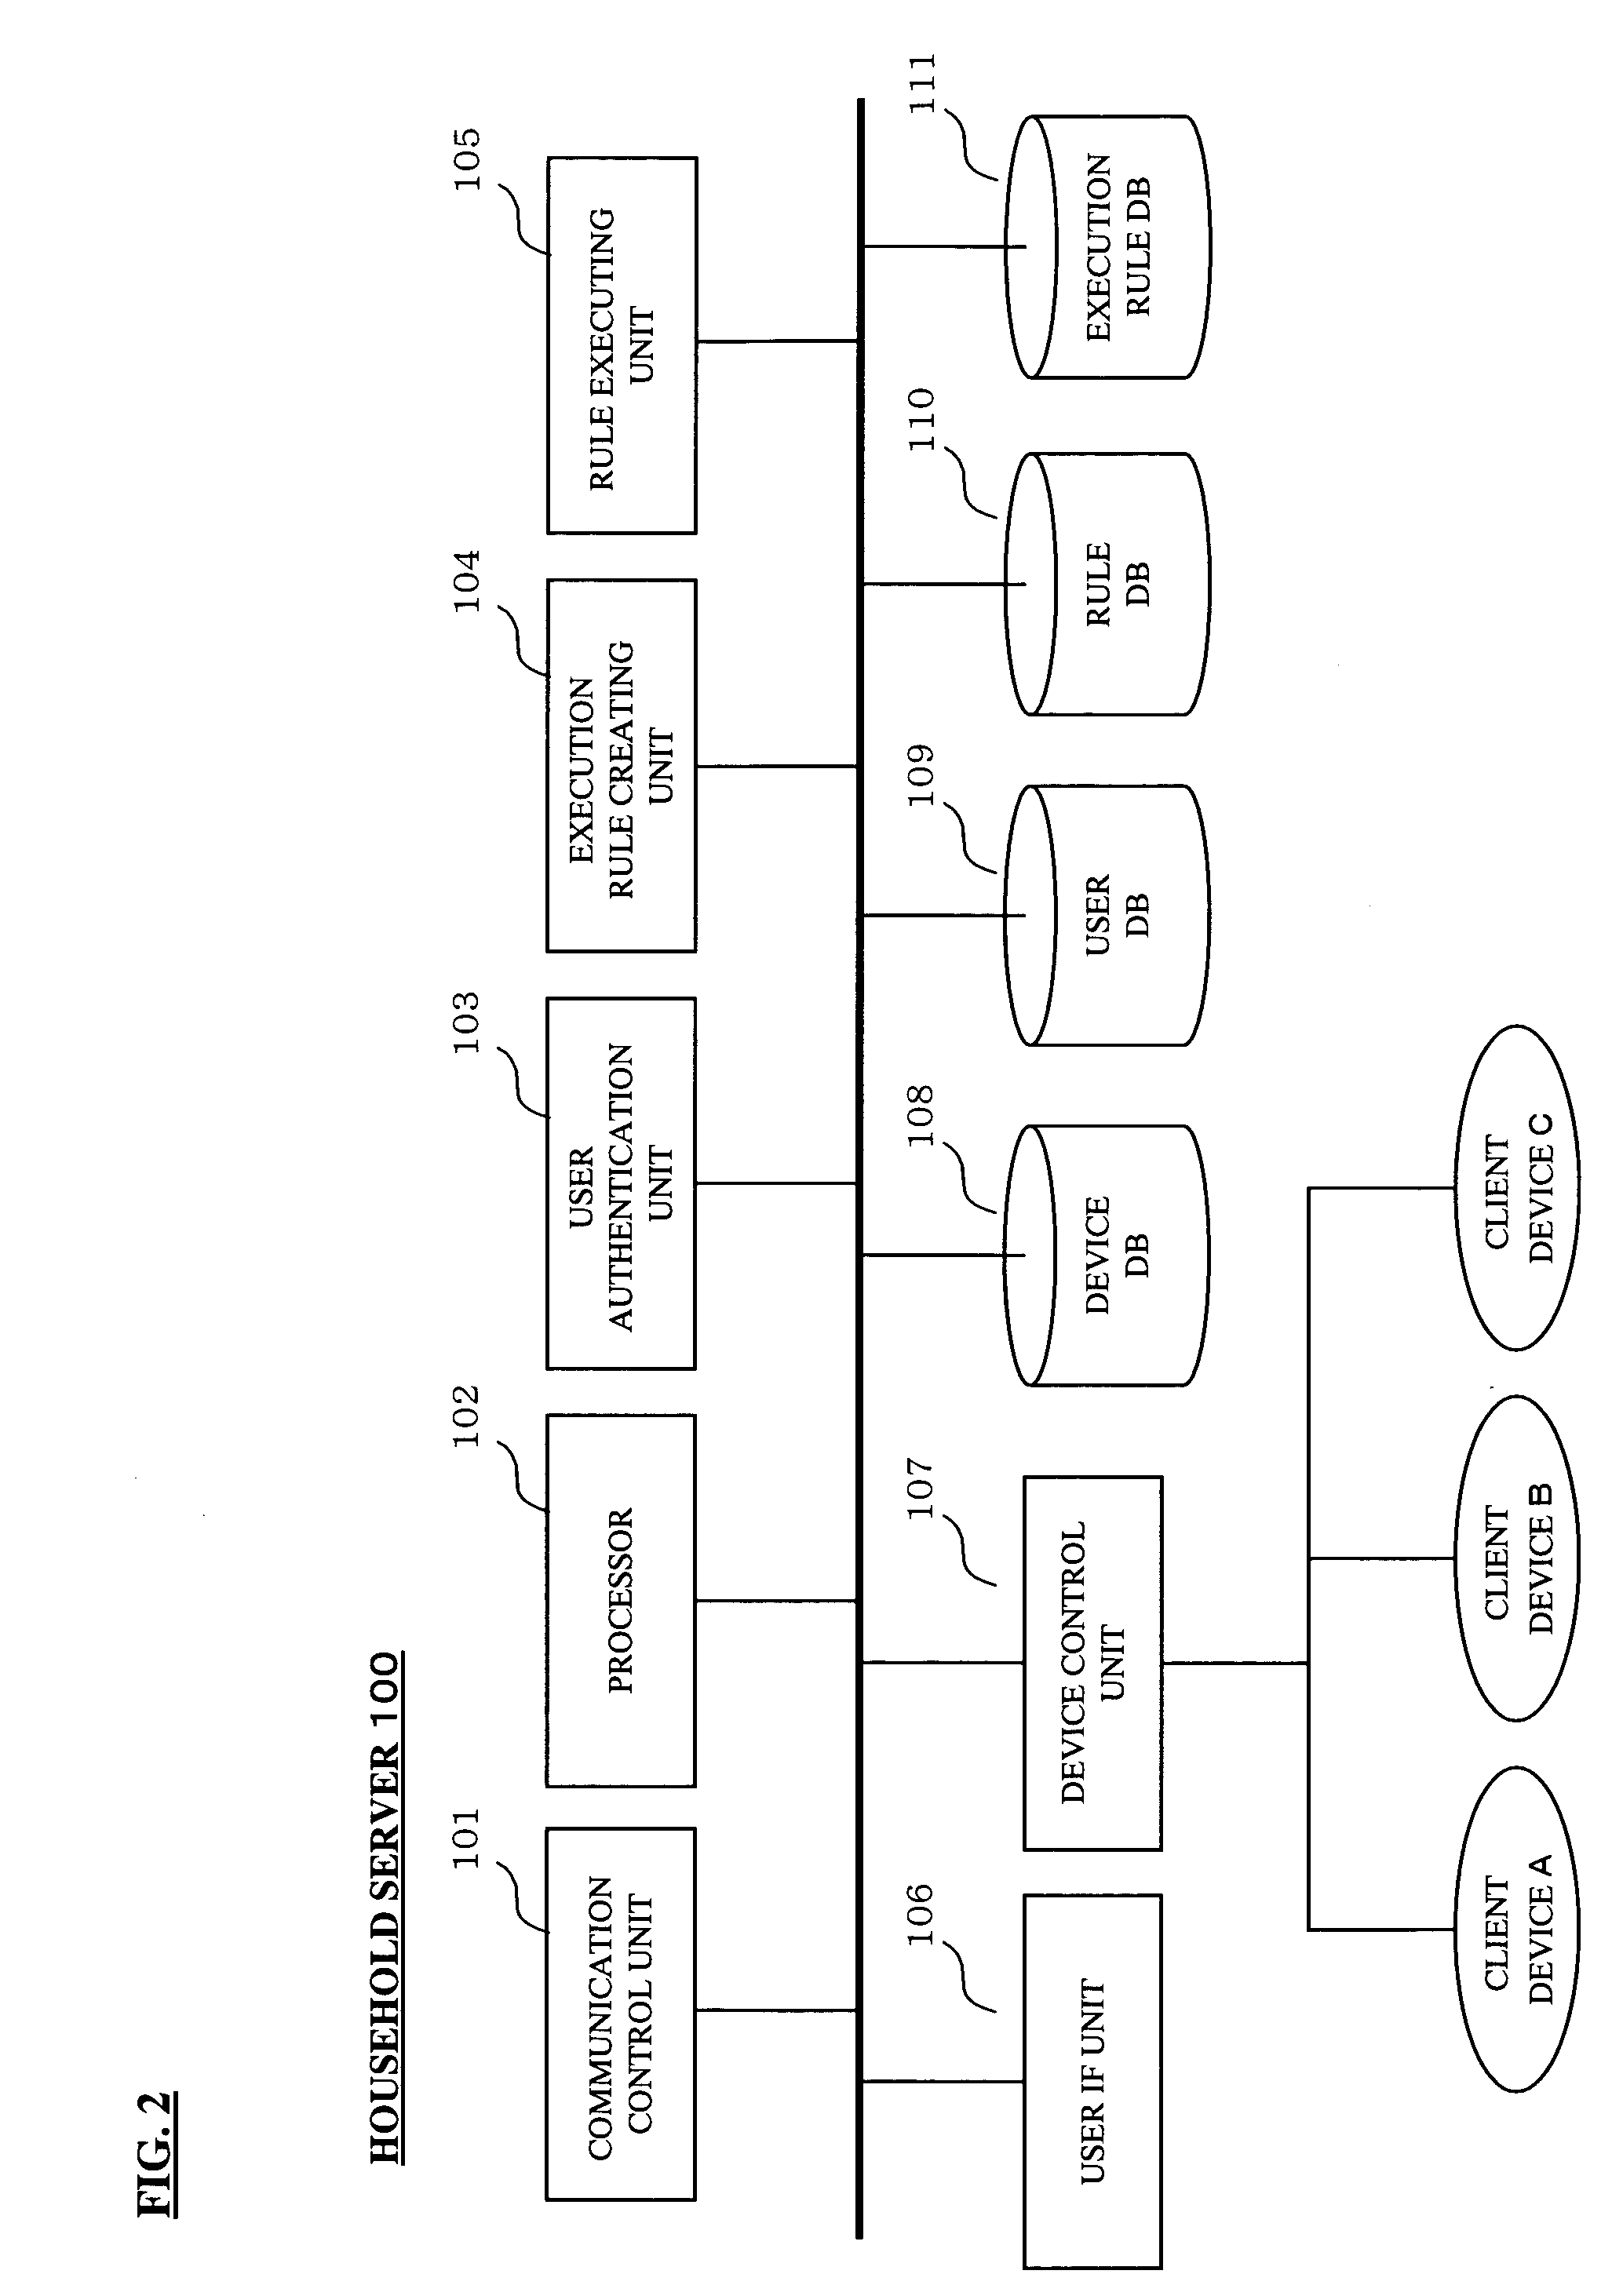 Network system, appliance controlling household server, and intermediary server